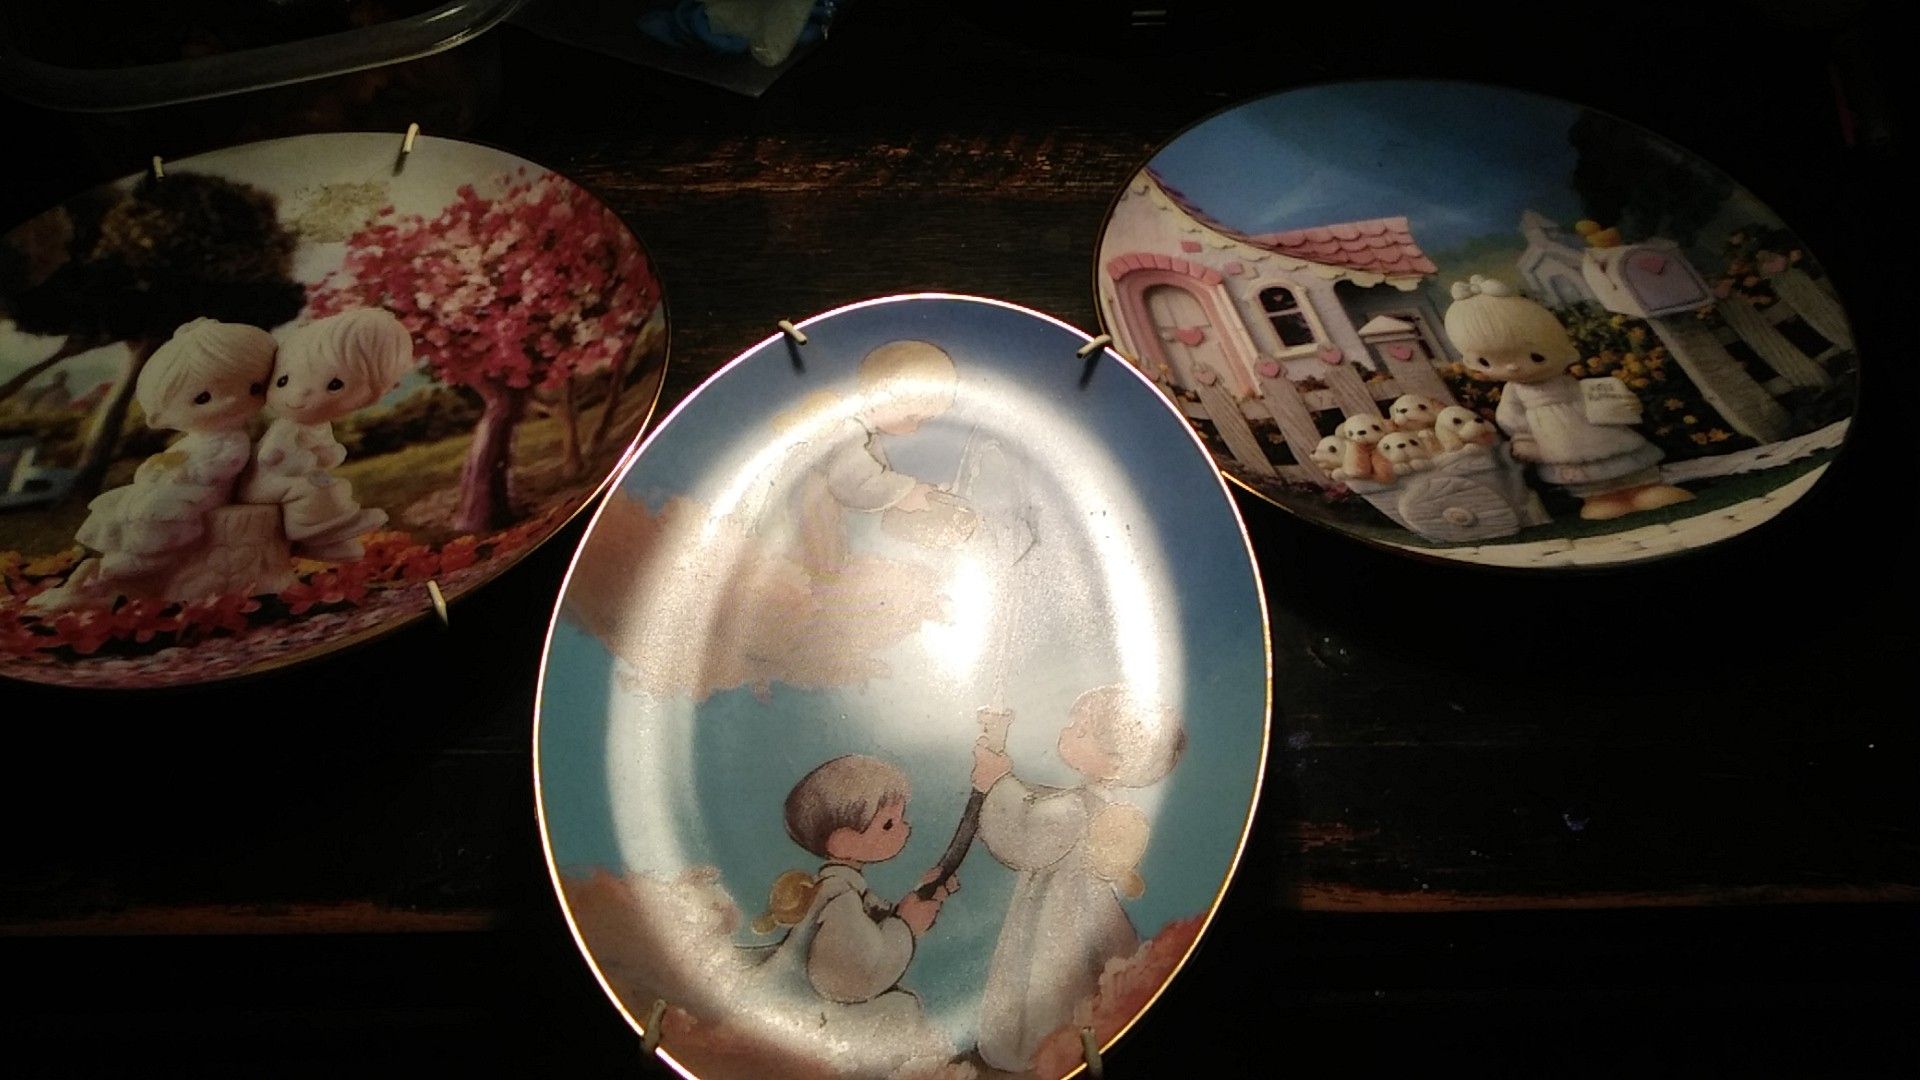 3 precious moments plates. Obo $100 for all. Or $50 each